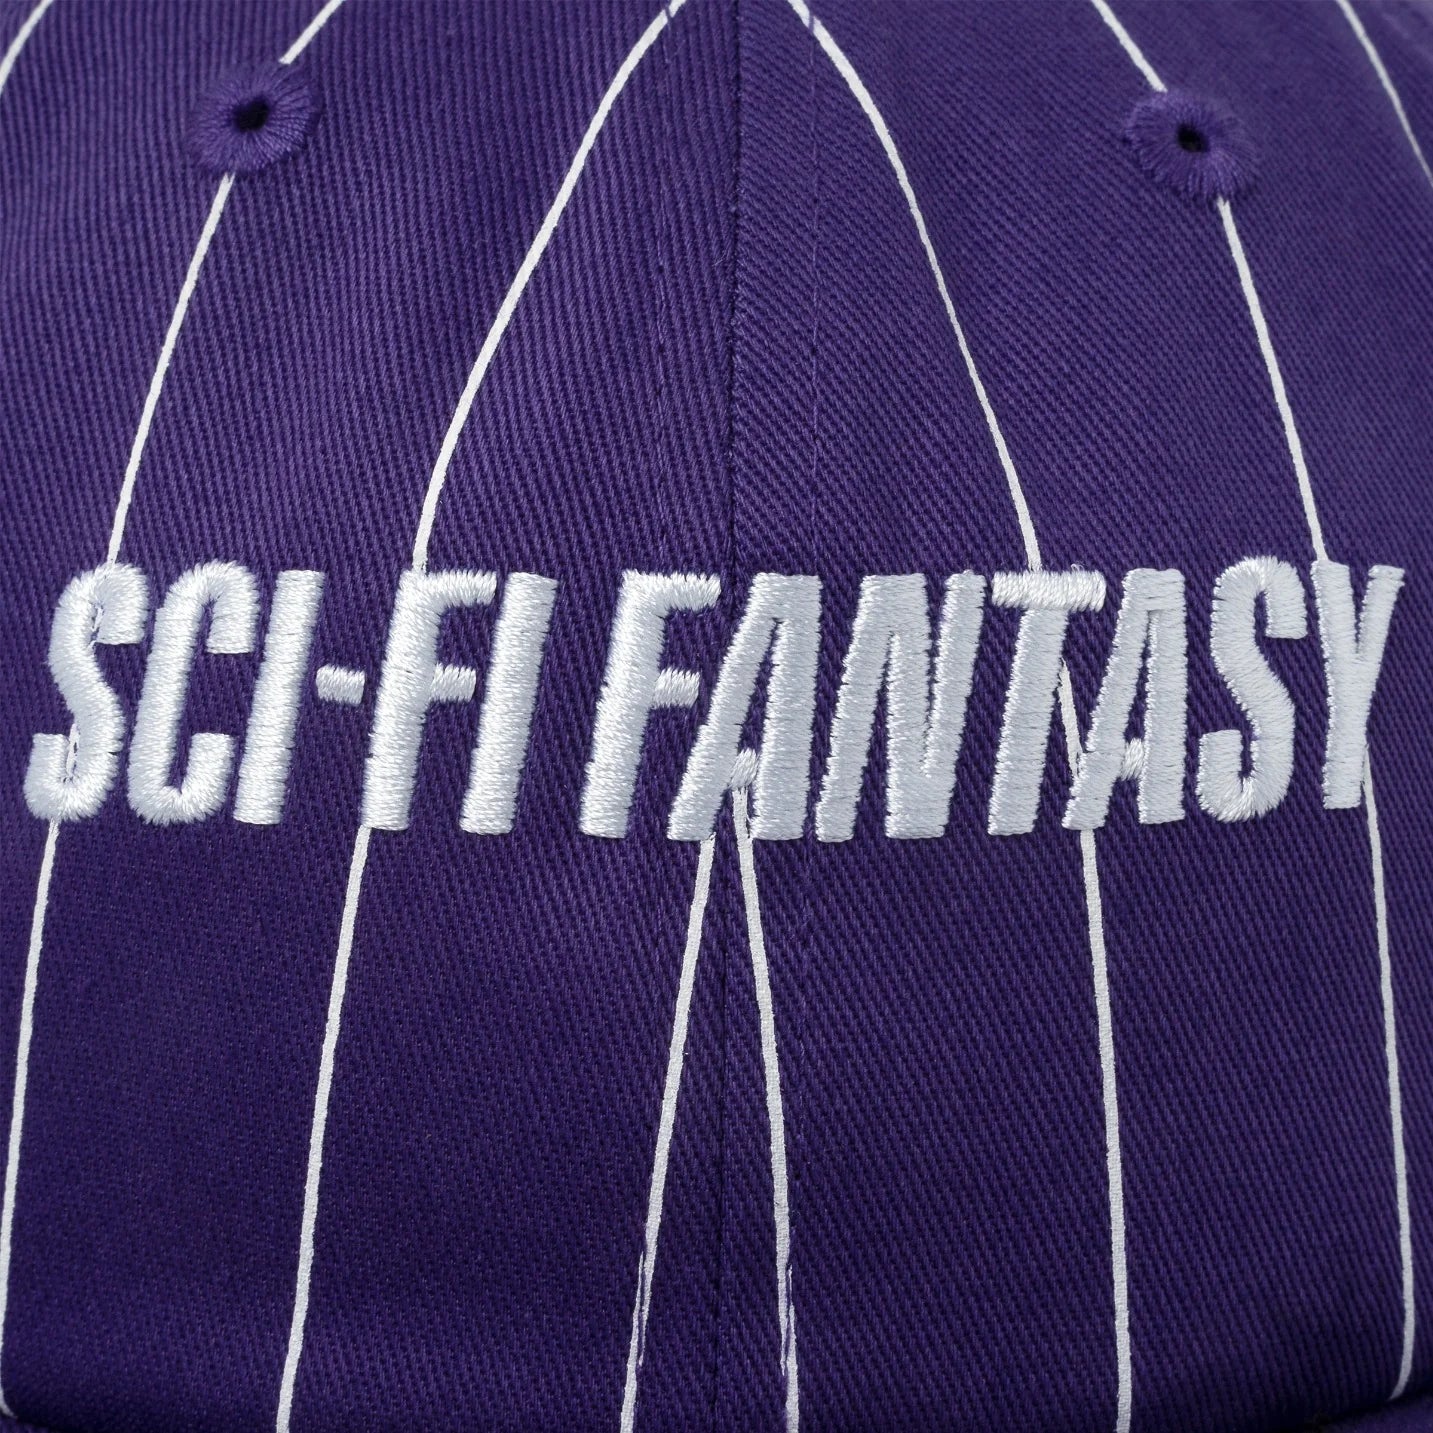 Purple sci fi fantasy six panel cap with white stripes and a white logo. Free uk shipping over £50